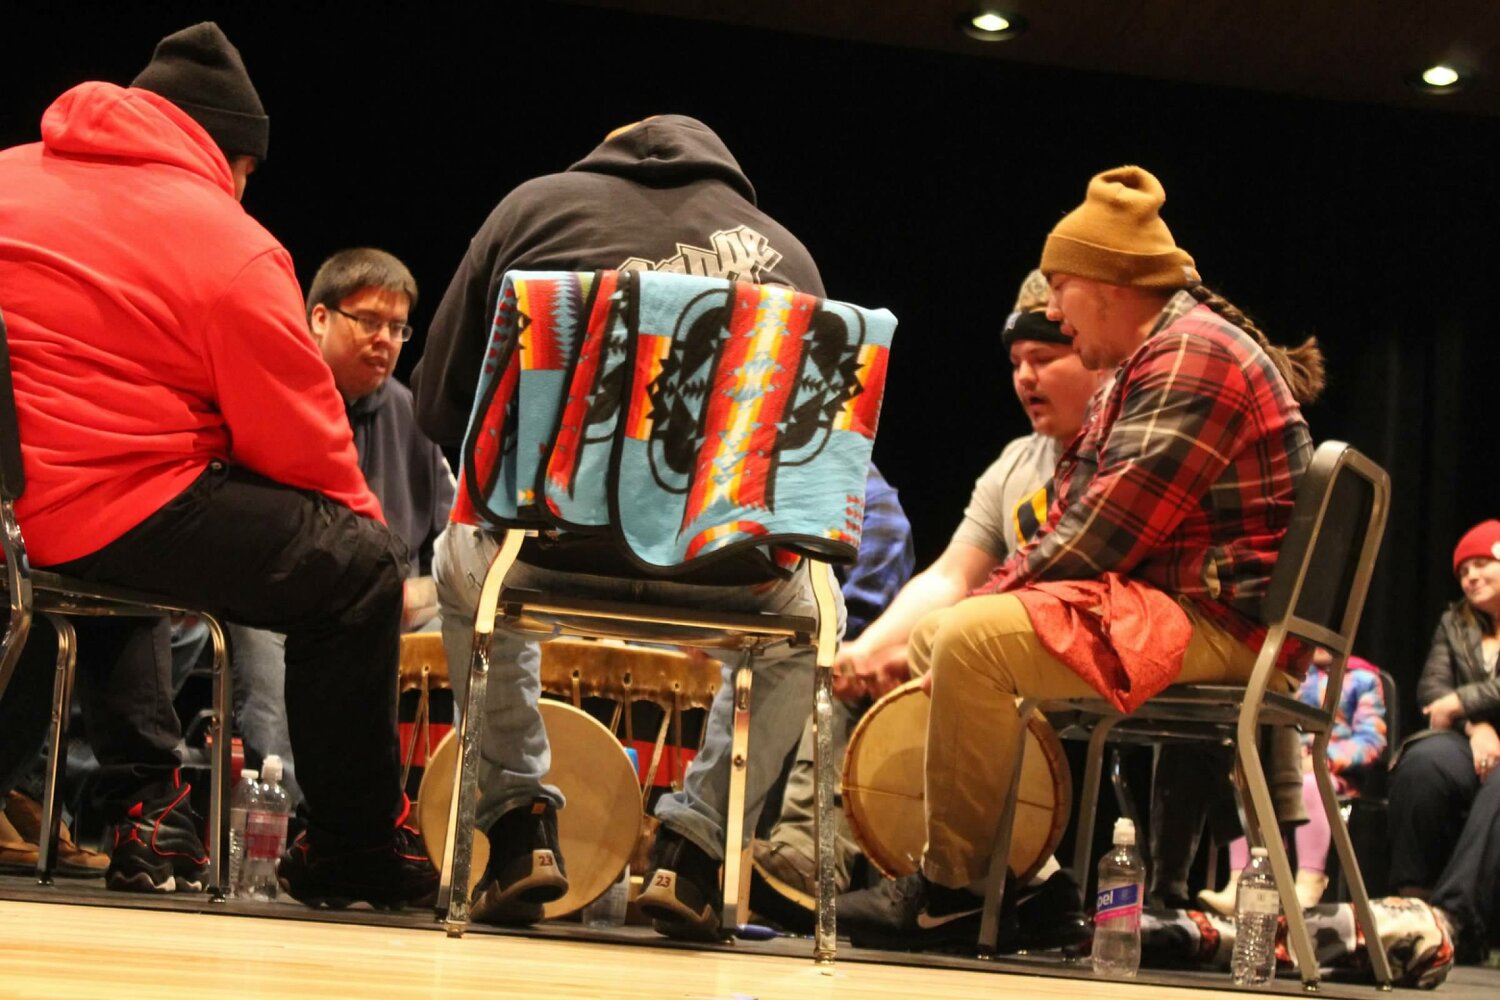 The Tomahawk Circle Ojibwe Drumming and Singing Group form Lac du Flambeau plays the hand drums, a traditional drum of the Ojibwe people.